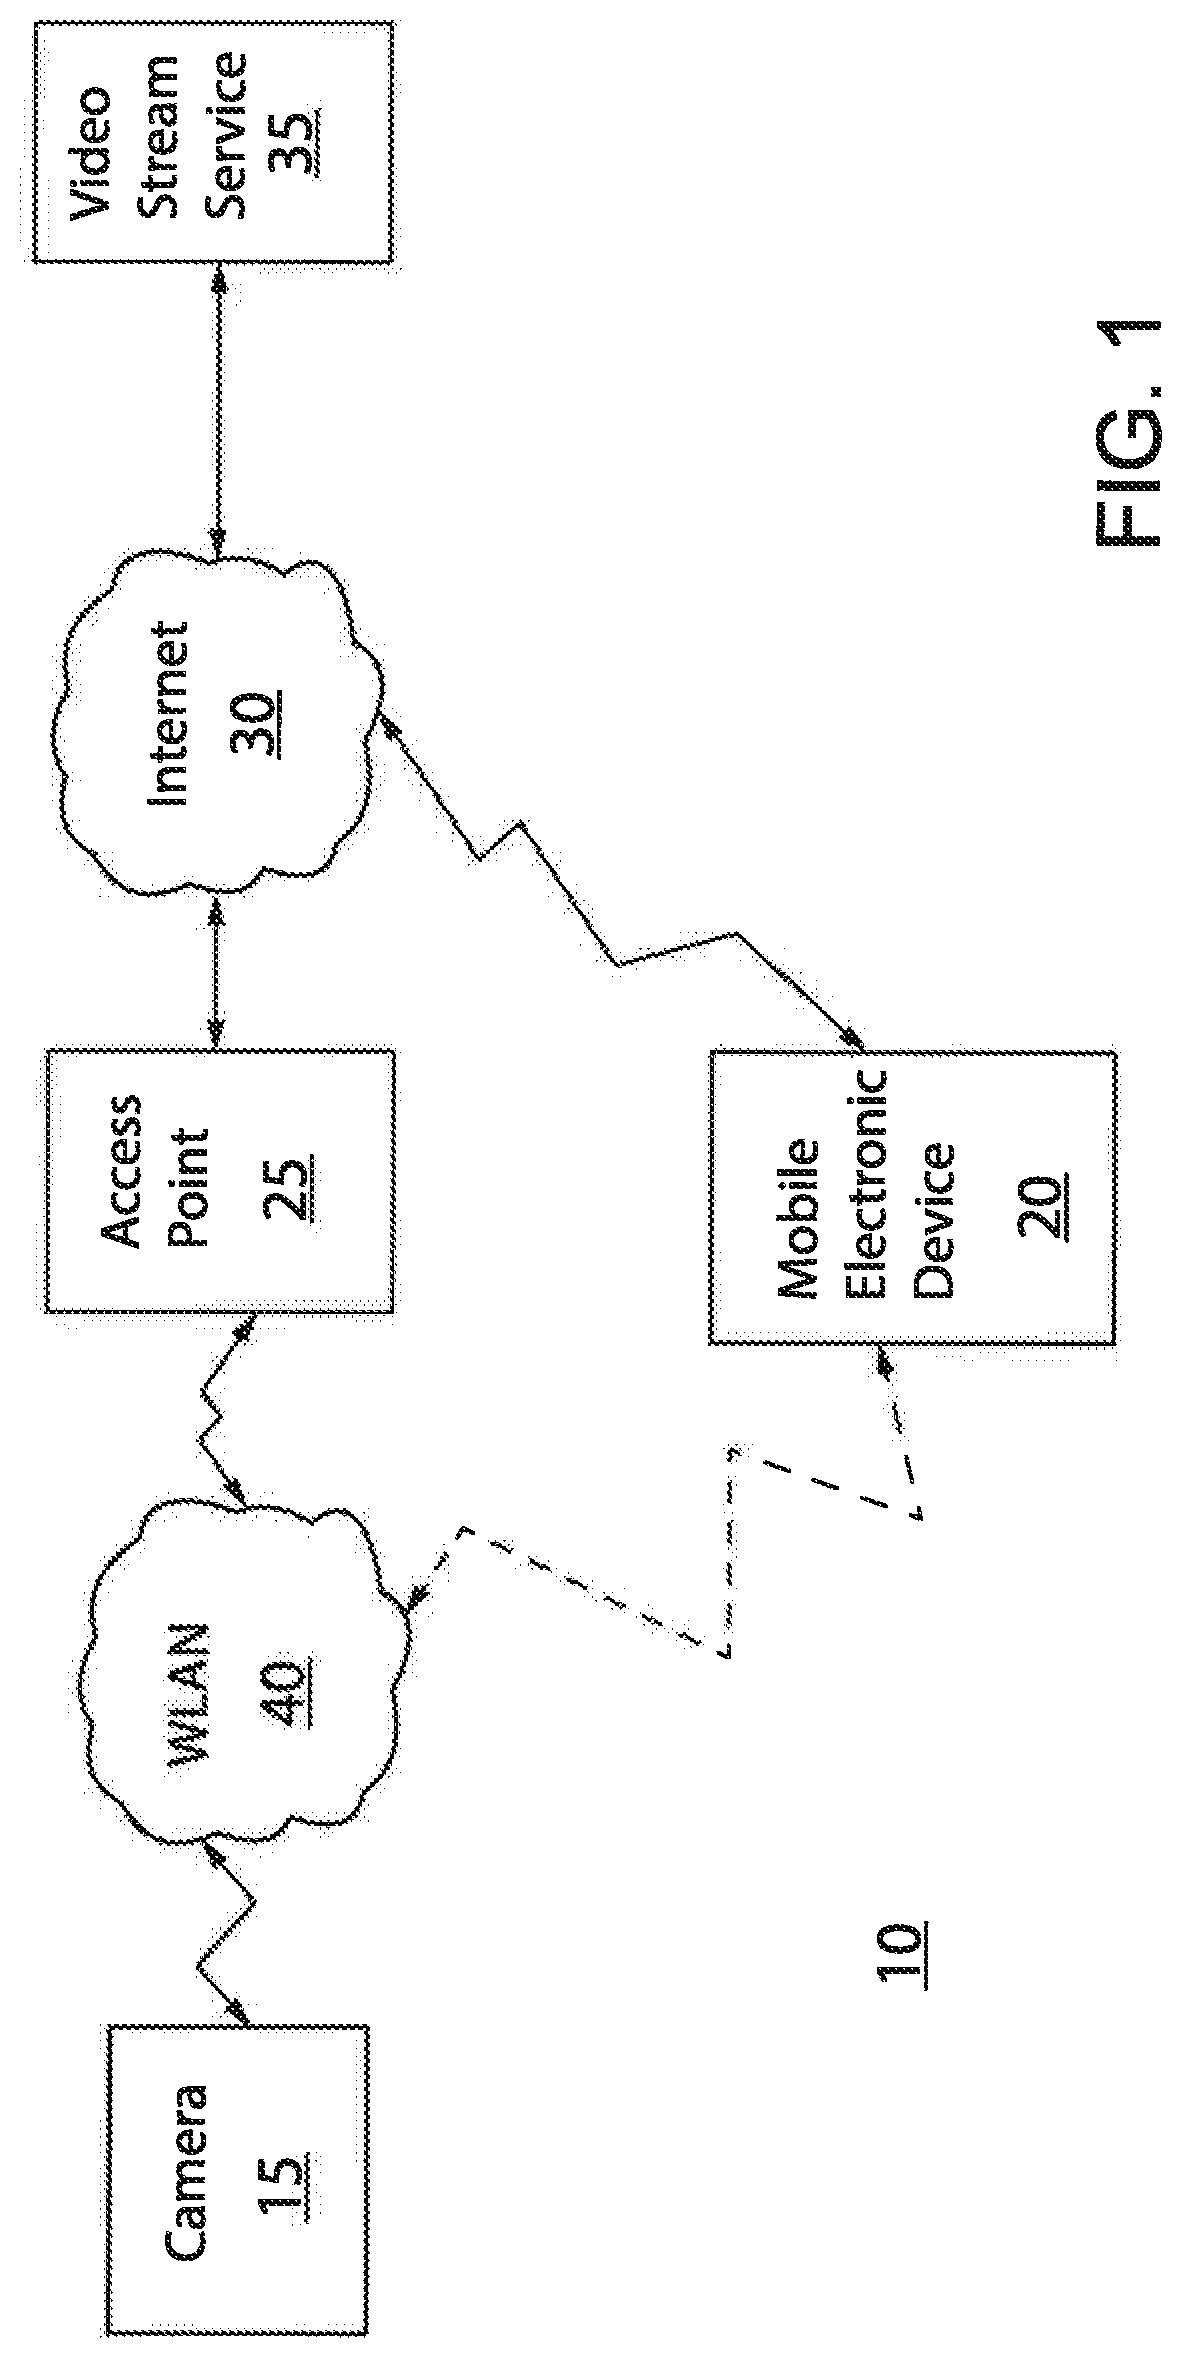 Method Of Communicating Video From A First Electronic Device To A Second Electronic Device Via A Network, And A System Having A Camera And A Mobile Electronic Device For Performing The Method